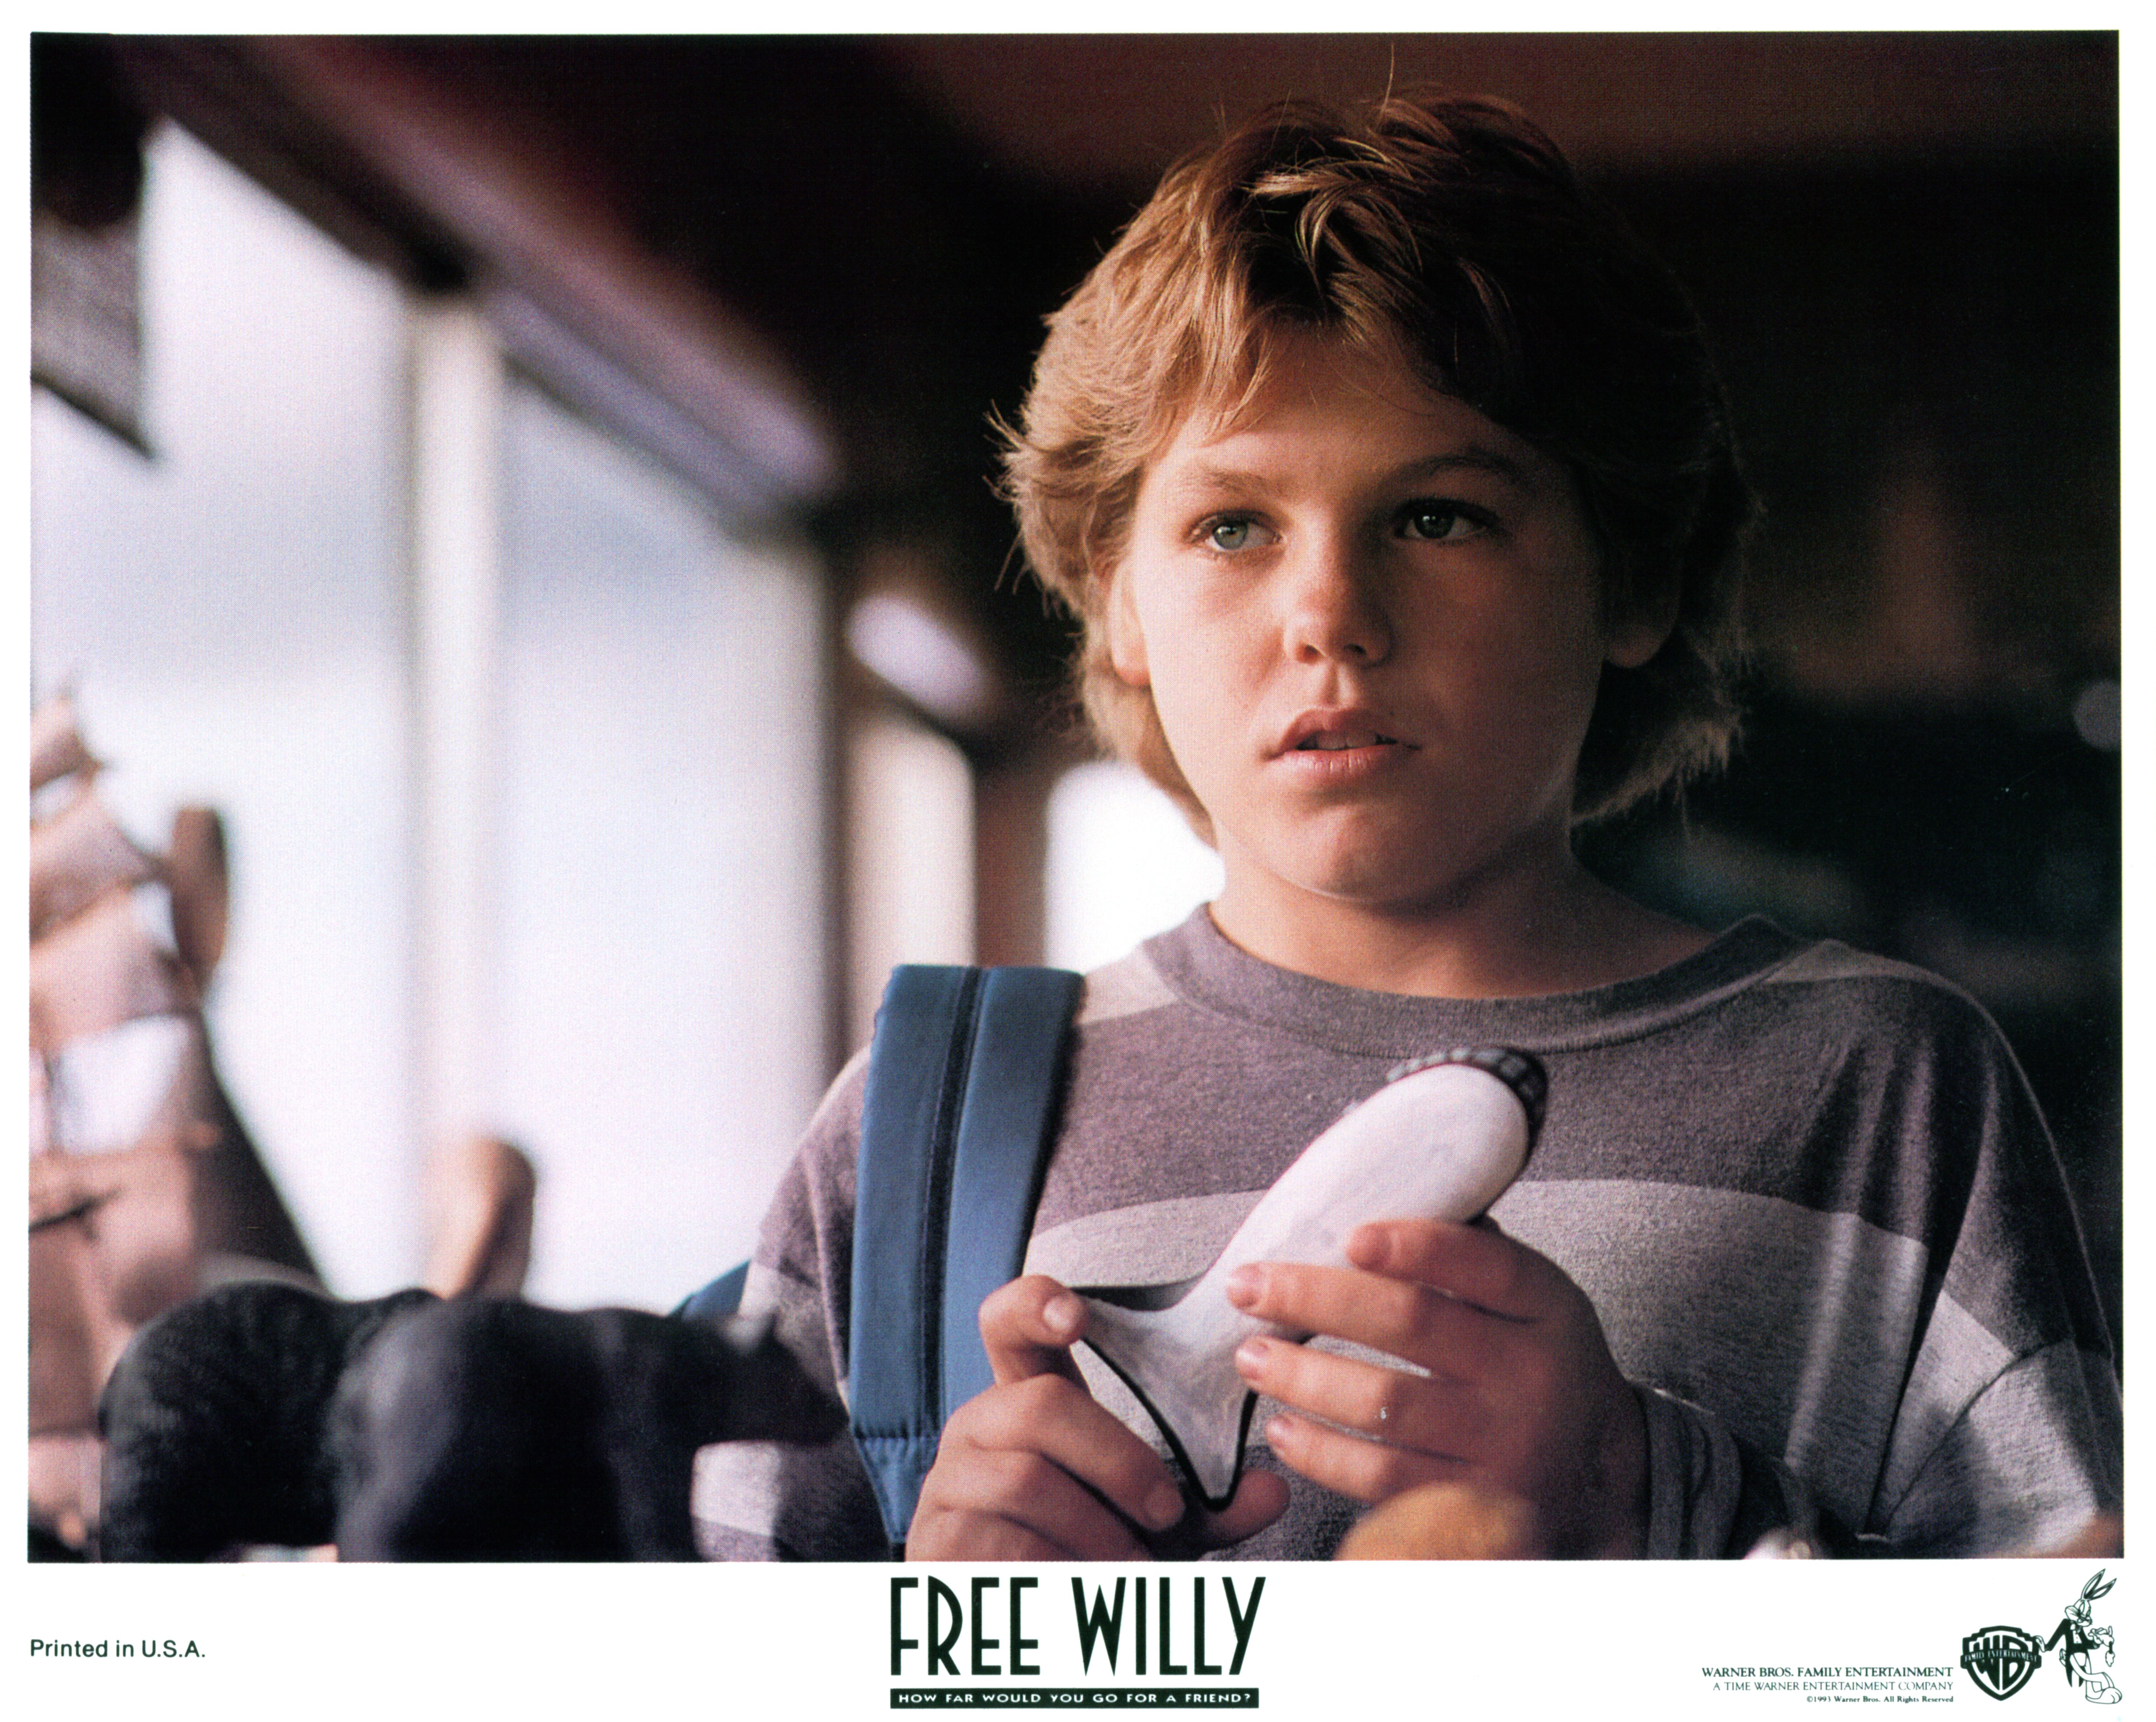 Jason James Richter holding whale piece in a scene from the film "Free Willy" in 1993. | Source: Getty Images